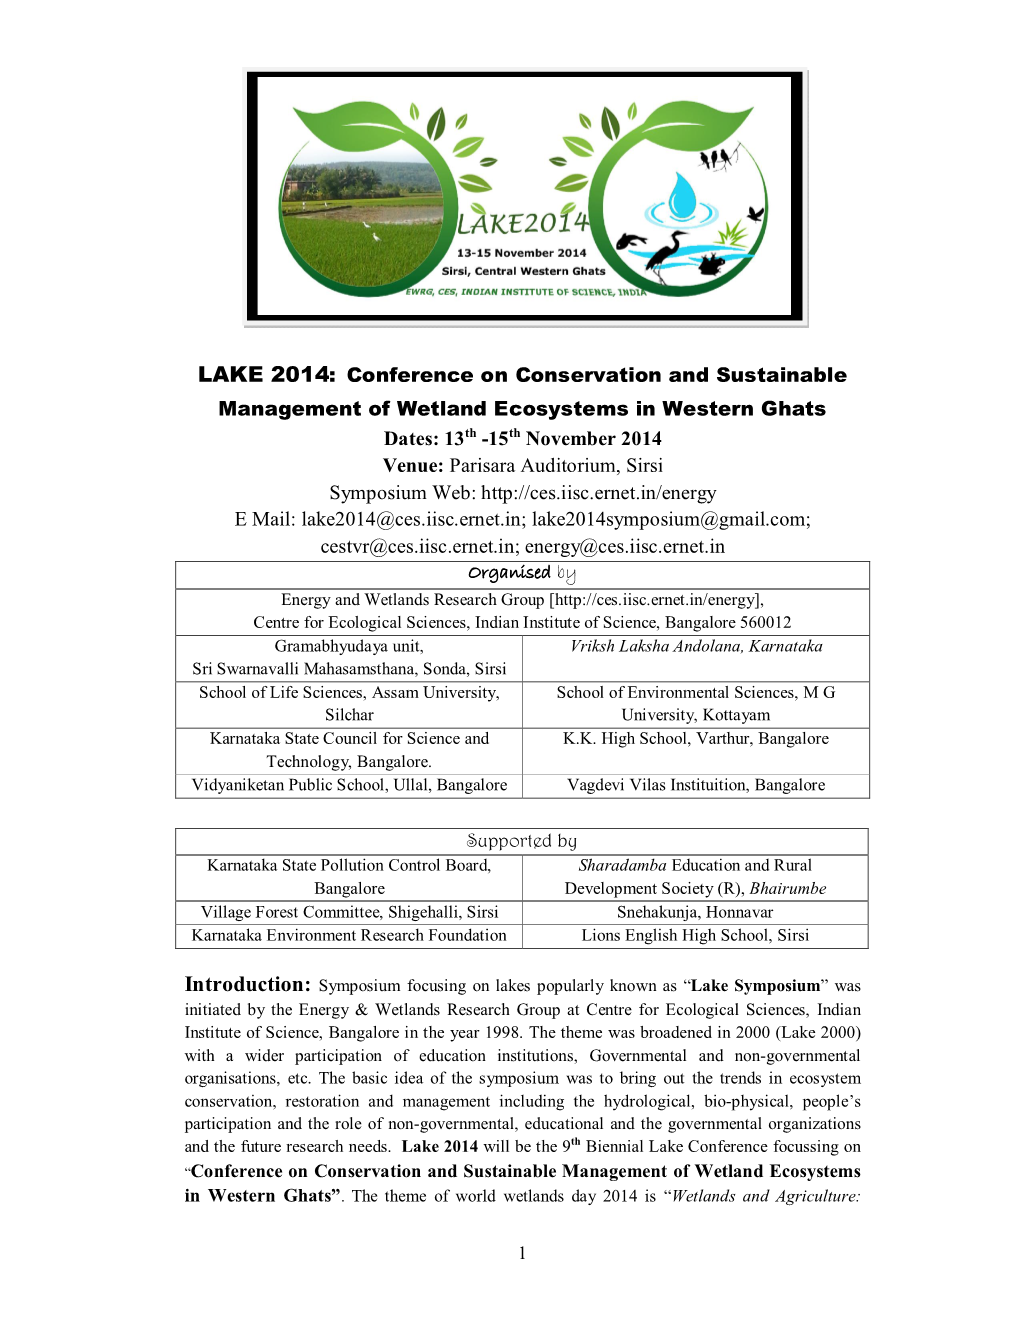 LAKE 2014: Conference on Conservation And